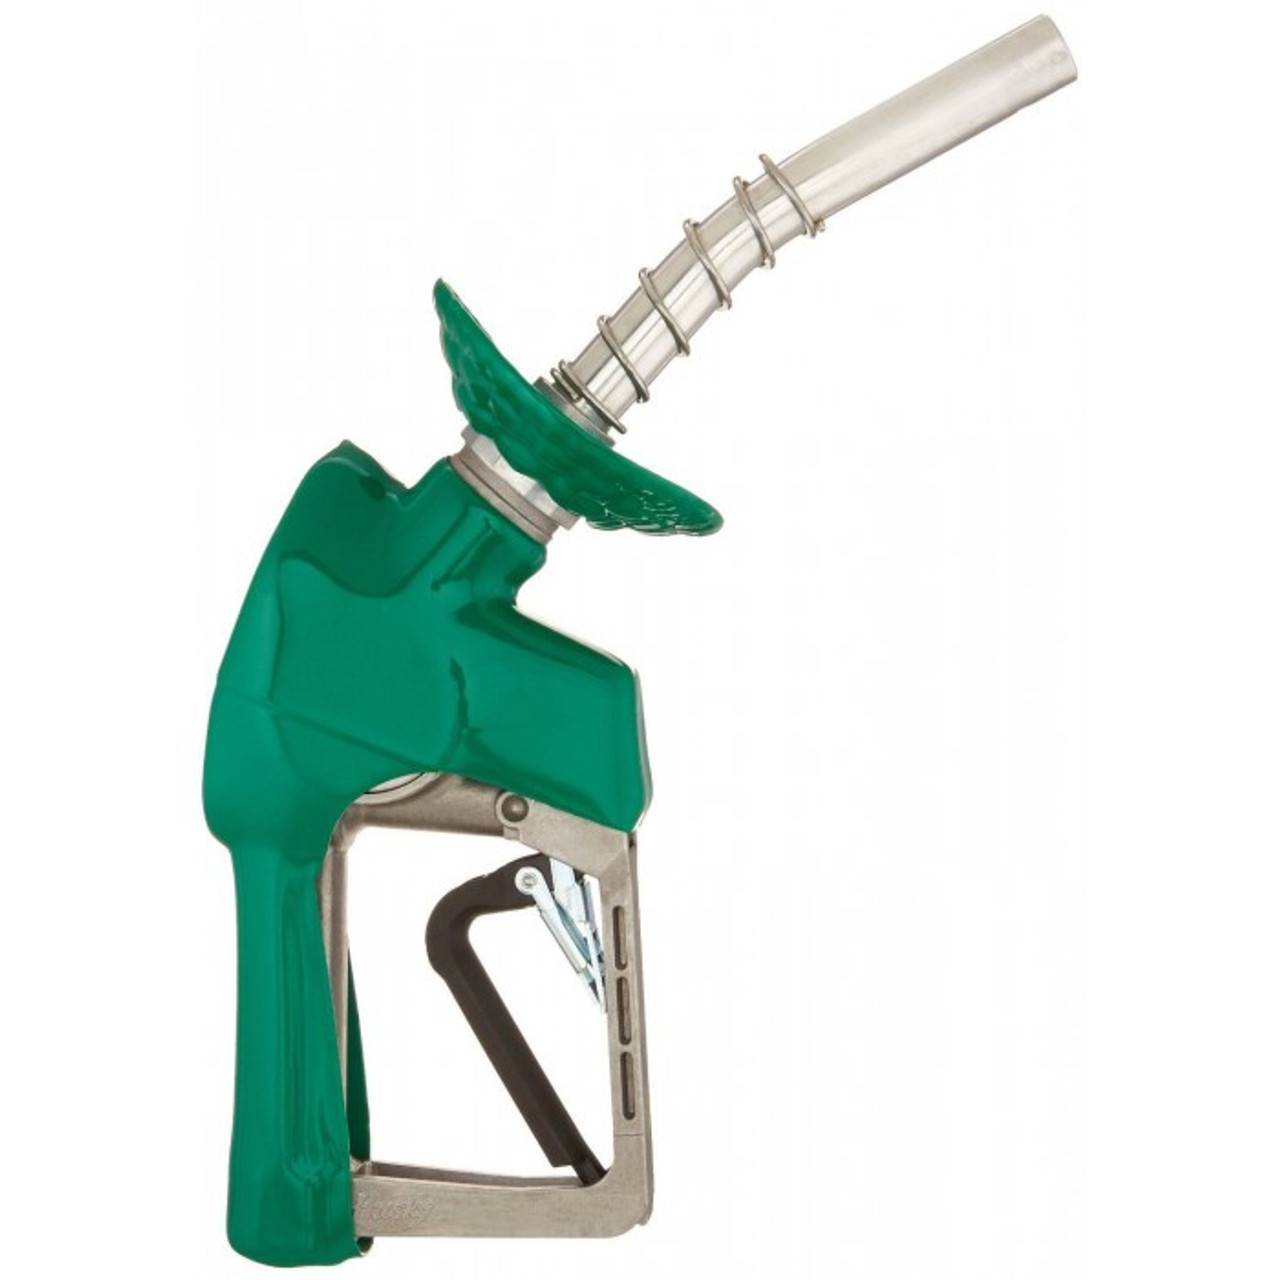 Husky XS Nozzle Unleaded with Three Notch Hold Open Clip and Waffle Splash Guard - 03 Green